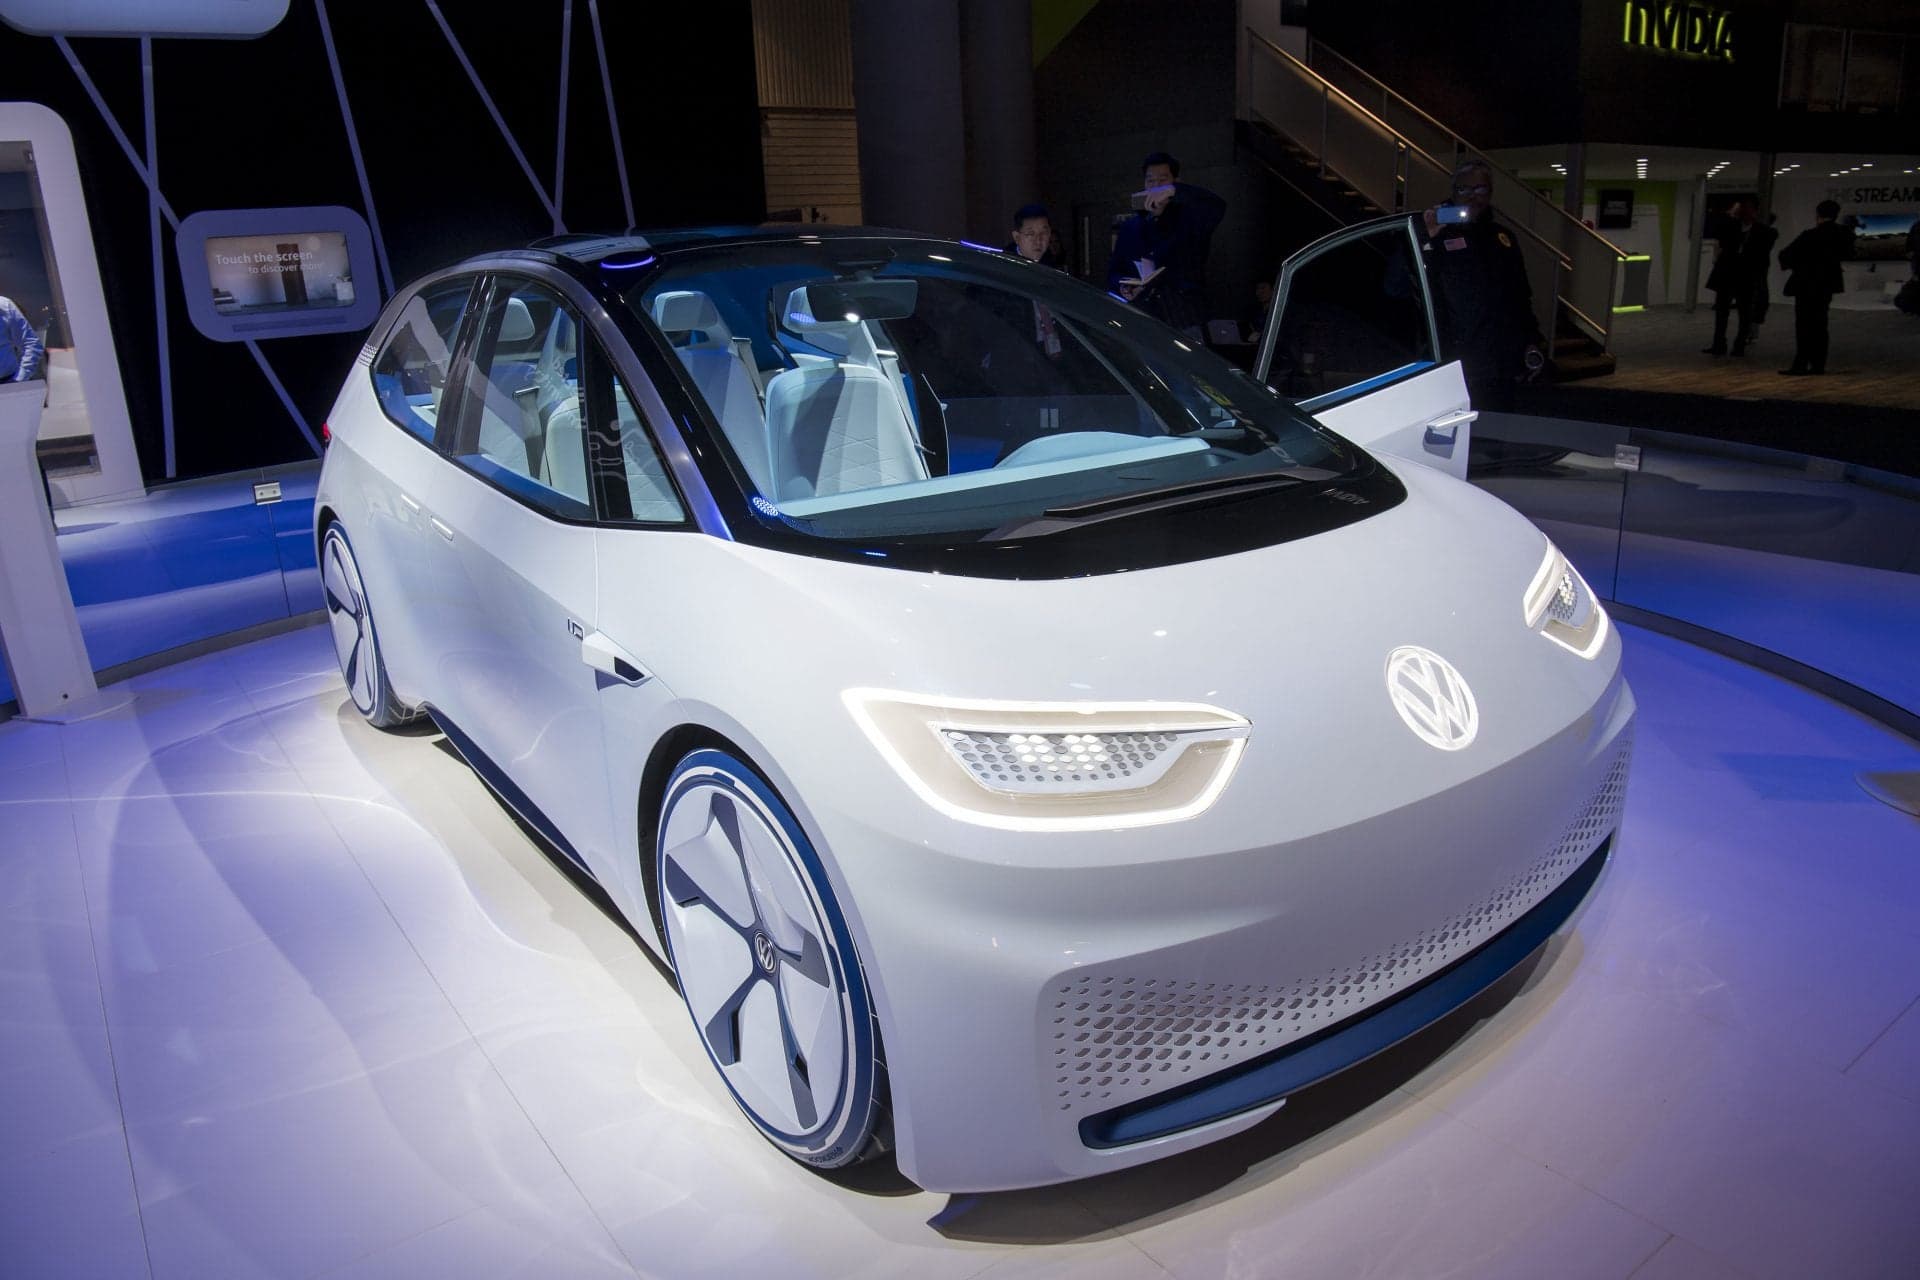 Volkswagen’s New Design Language May Show the Future of Electric Vehicle Forms